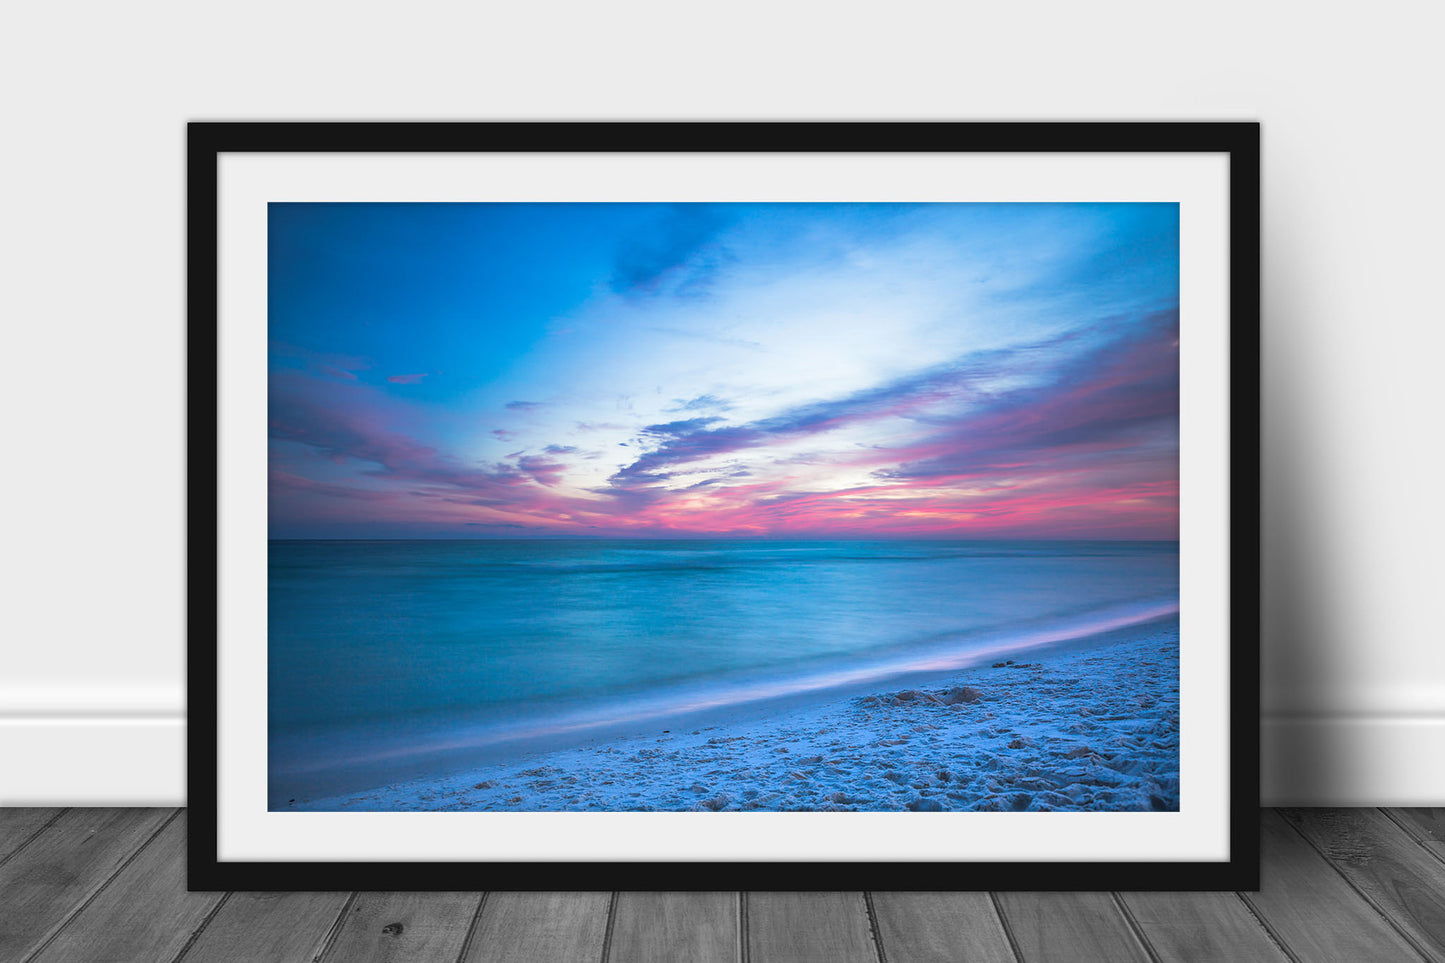 Framed and matted coastal photography print of a relaxing sunset over the emerald waters of the Gulf Coast along a beach near Destin, Florida by Sean Ramsey of Southern Plains Photography.